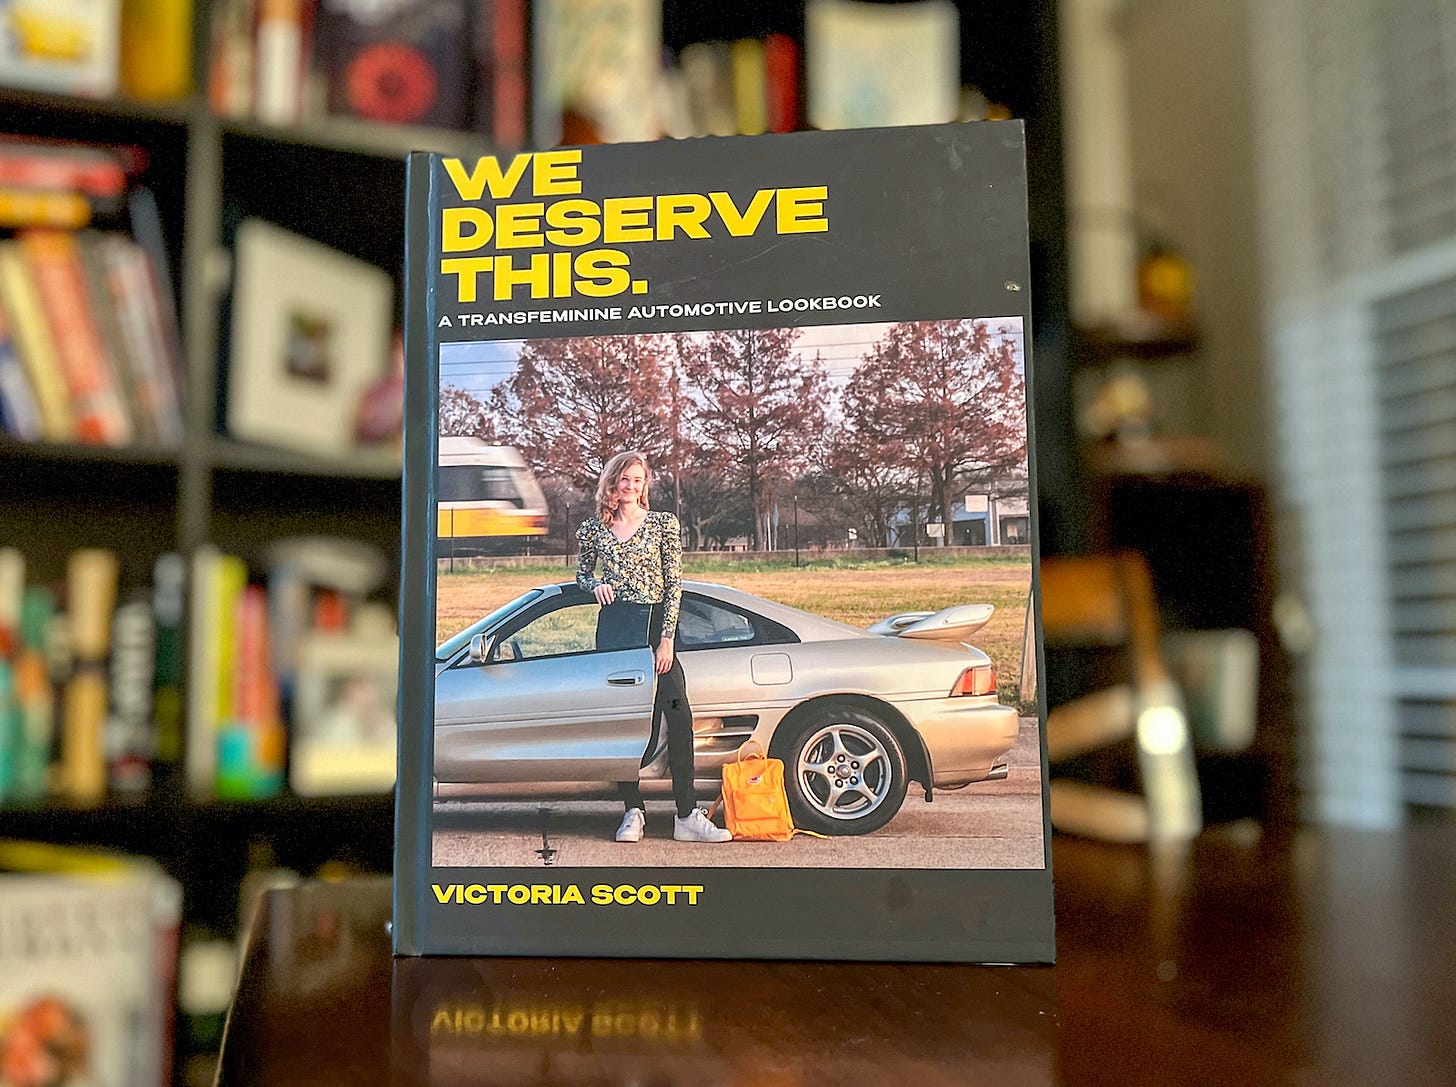 Front view of the coffee table book "We Deserve This" by Victoria Scott, standing on a table with a blurred bookcase behind it. A model poses on the cover standing in the doorway of a metallic gold Toyota MR2.